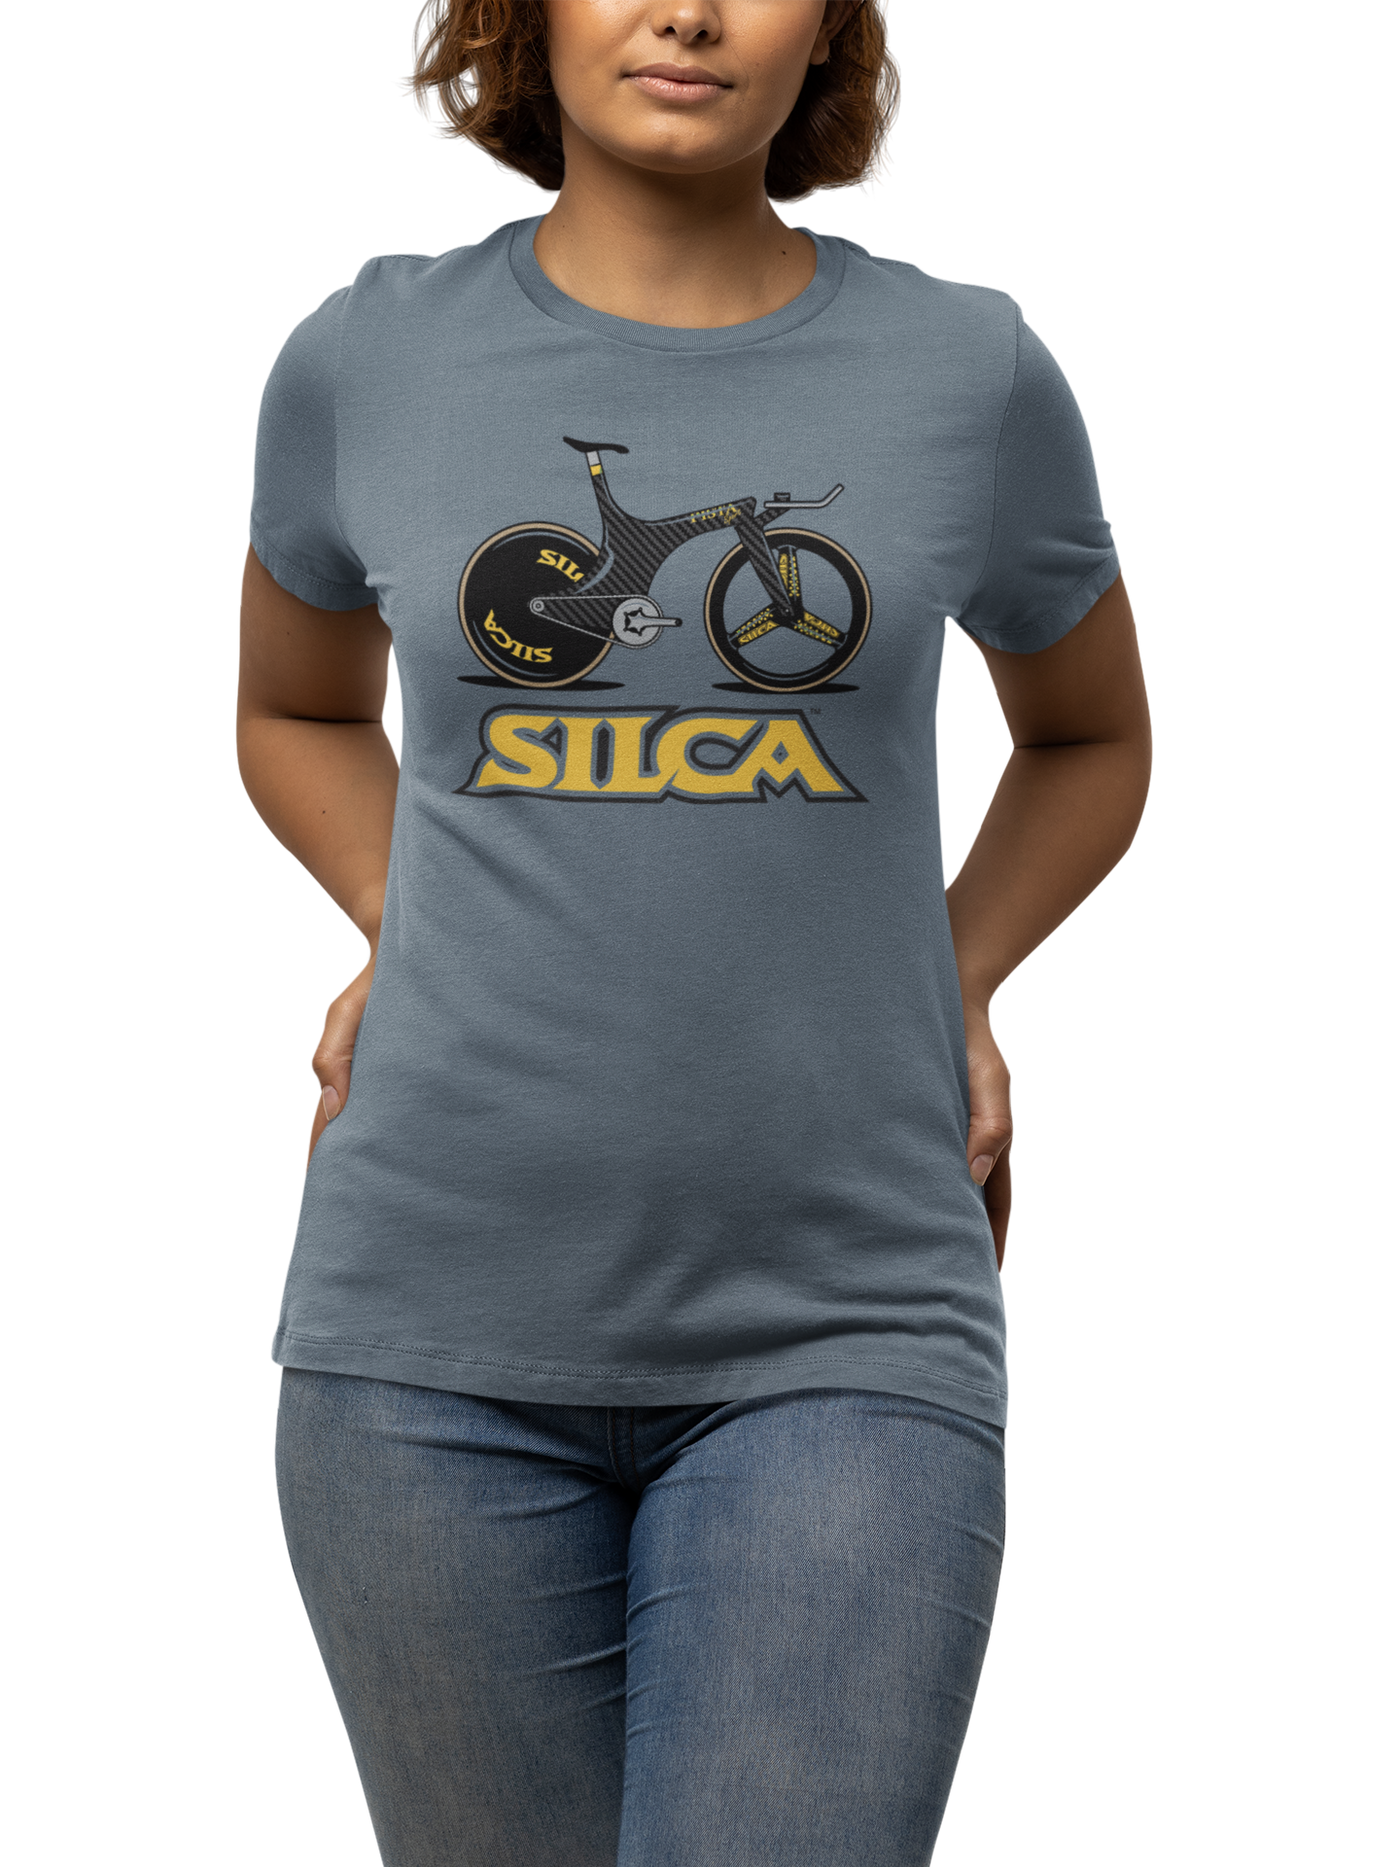 SILCA PISTA Hour Record Inspired Shirt